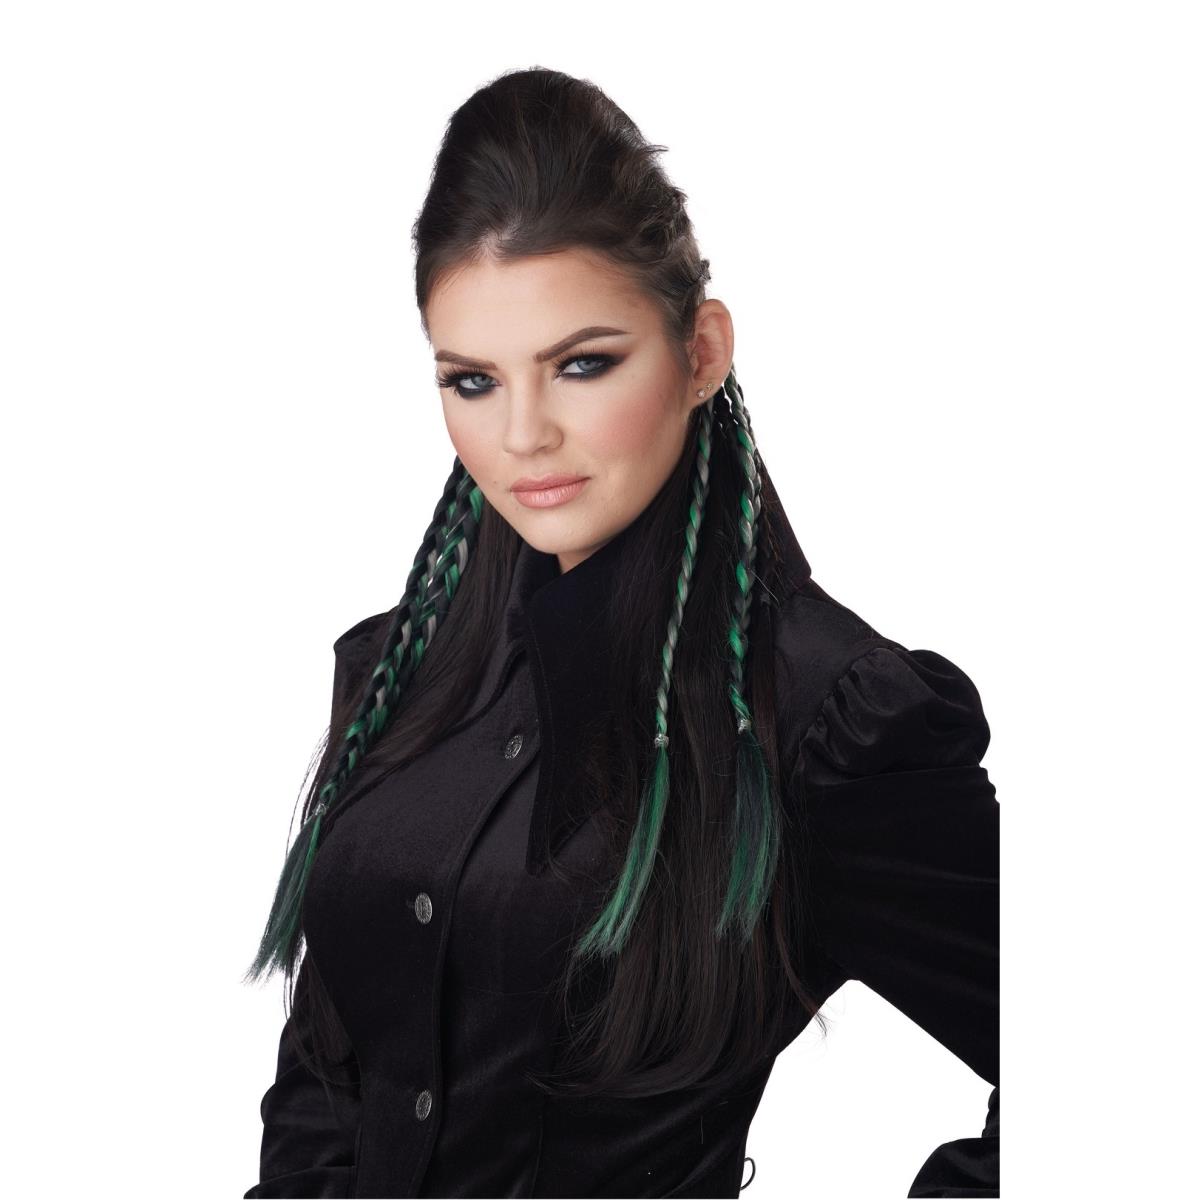 Picture of California Costume 641349 Adult Clip-In Braids Wholesale Halloween Costume - One Size